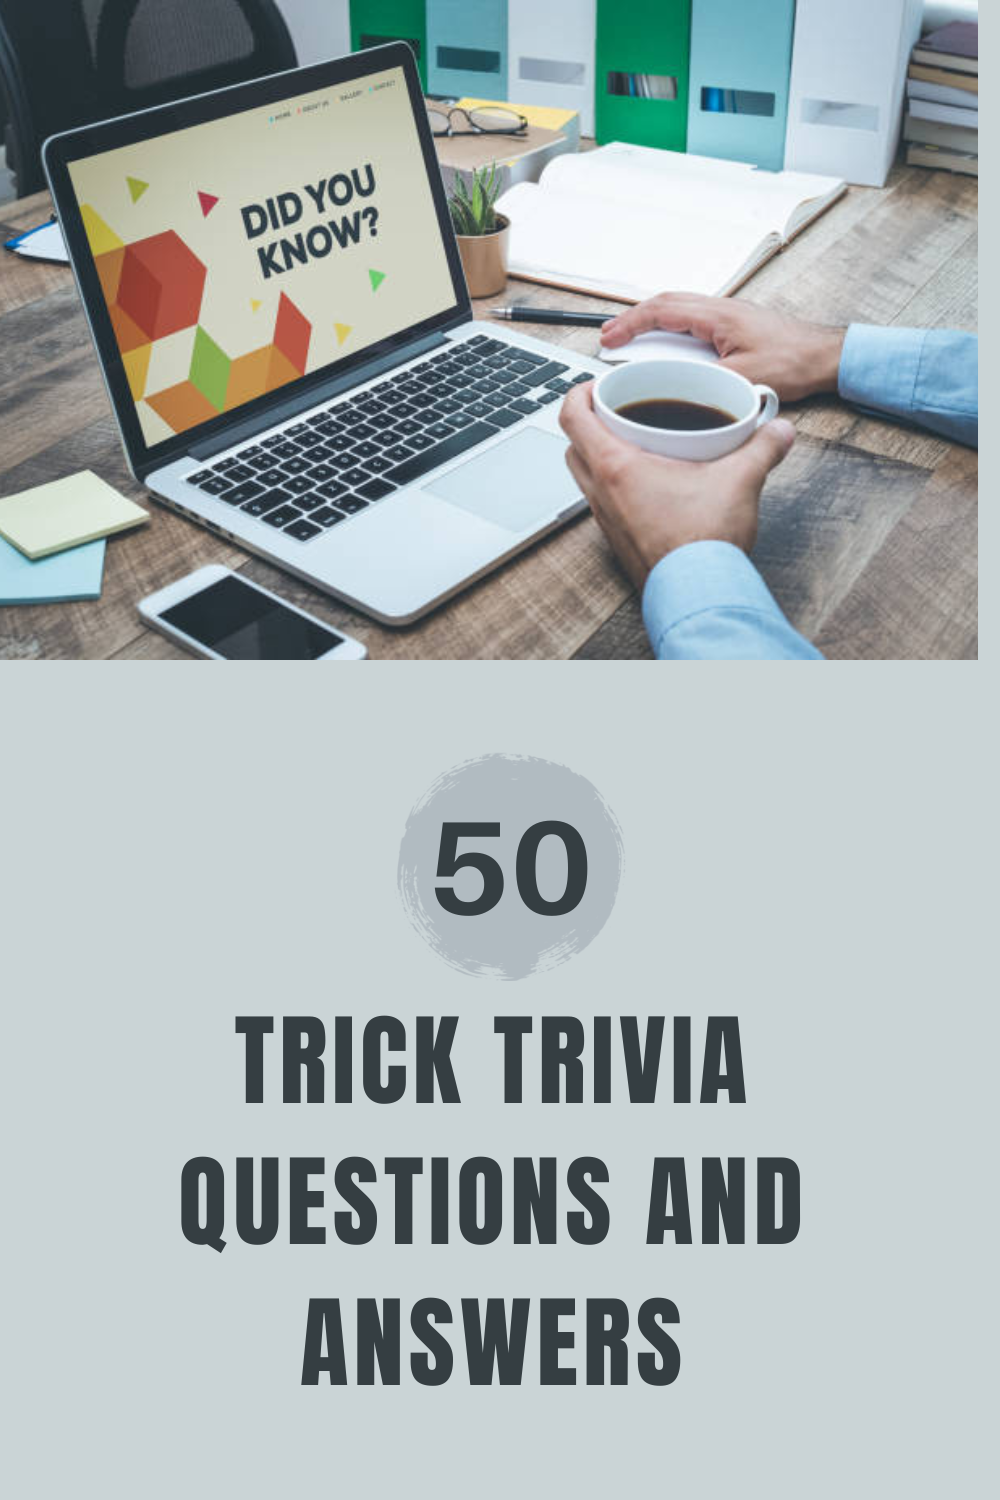 Trick Trivia Questions and Answers